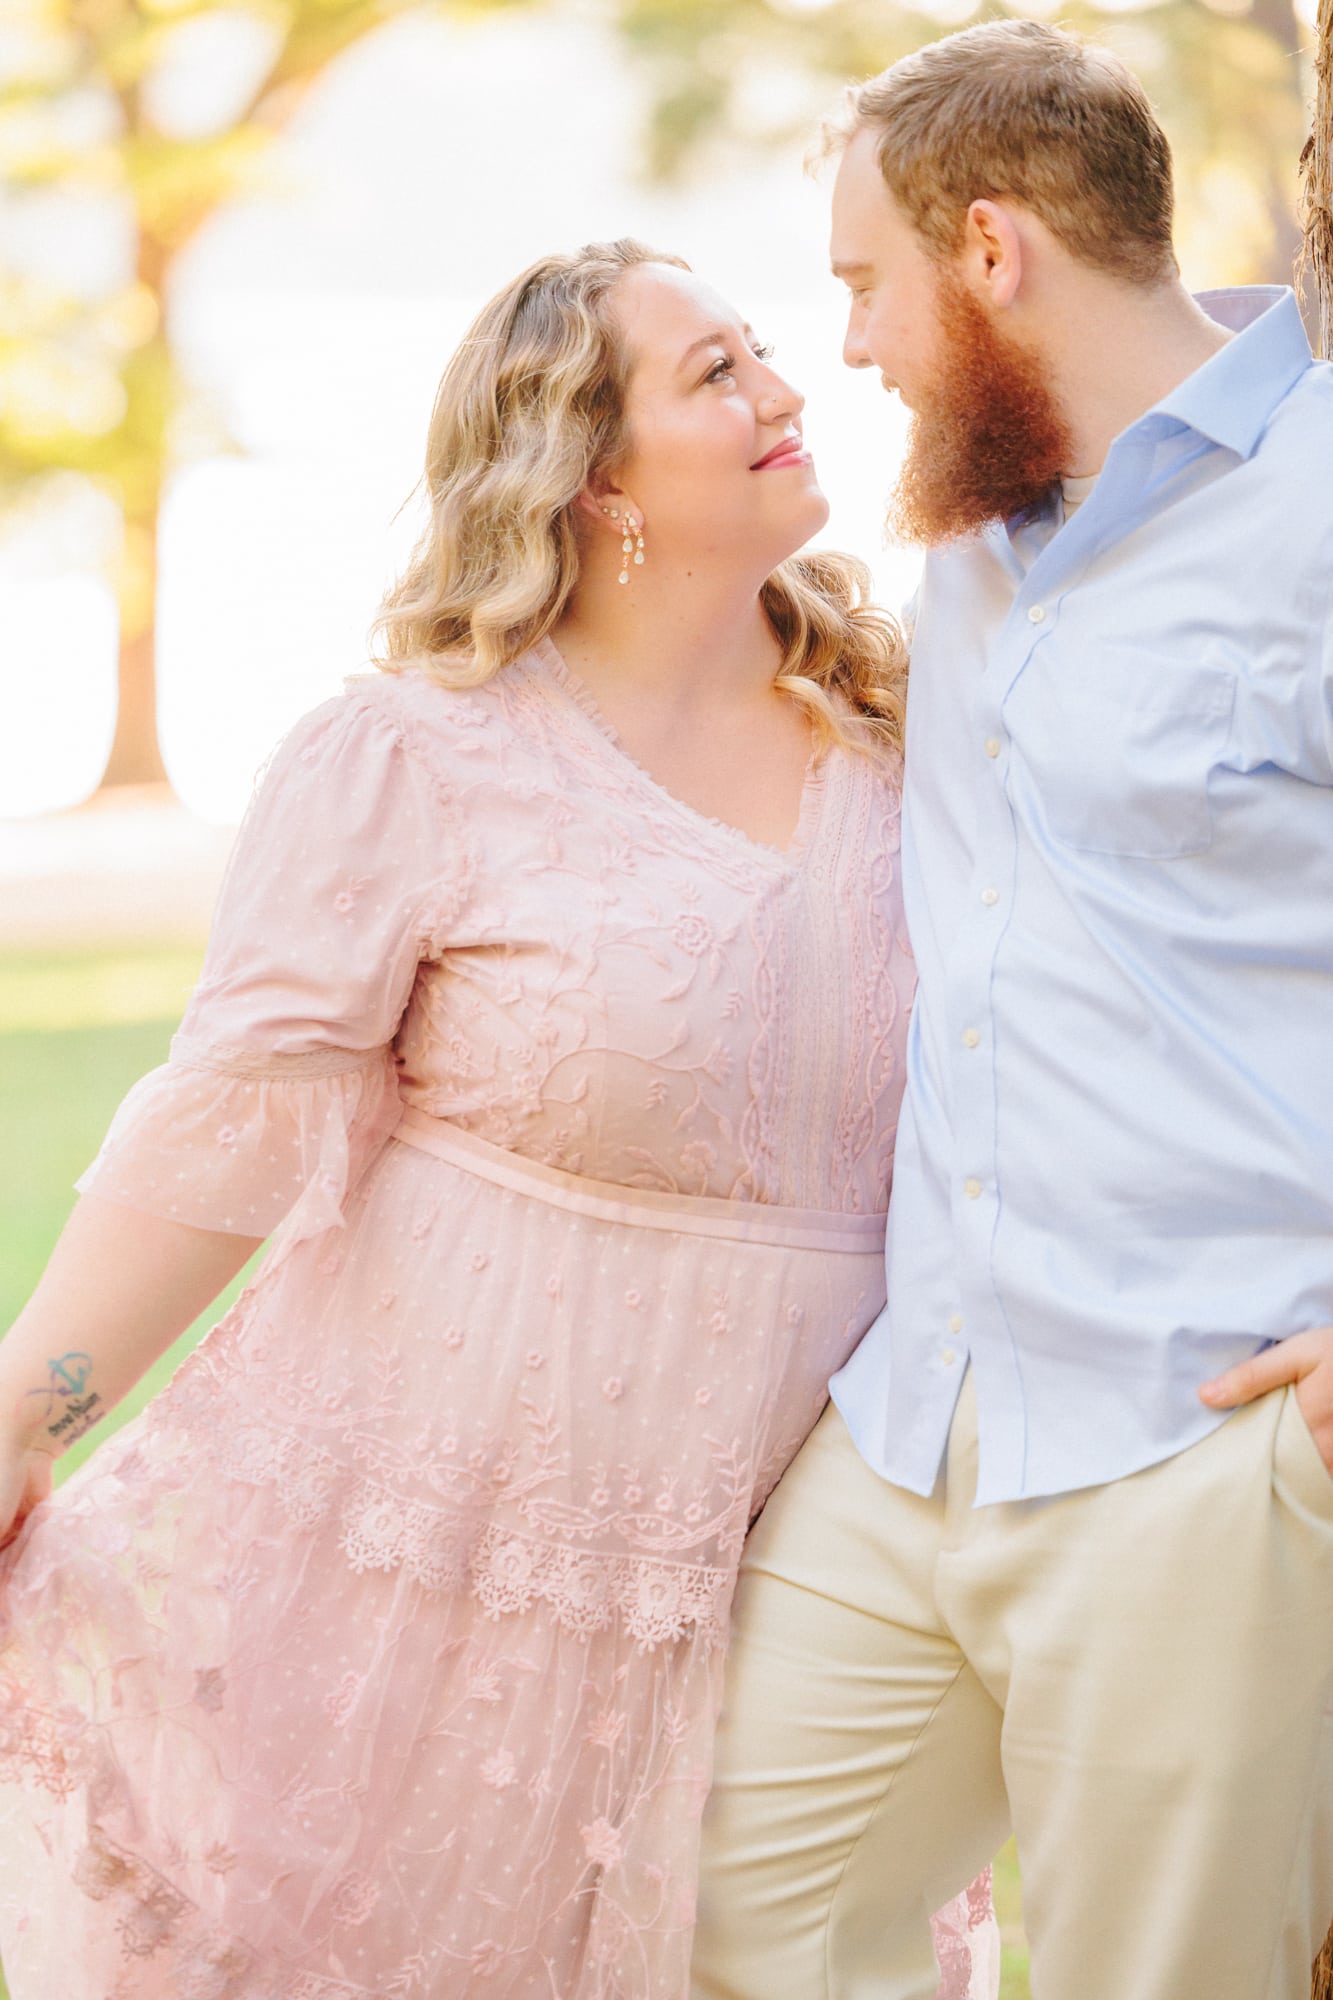 Shelby and Shawn hold each other close during their engagement photos in Huntersville, NC.